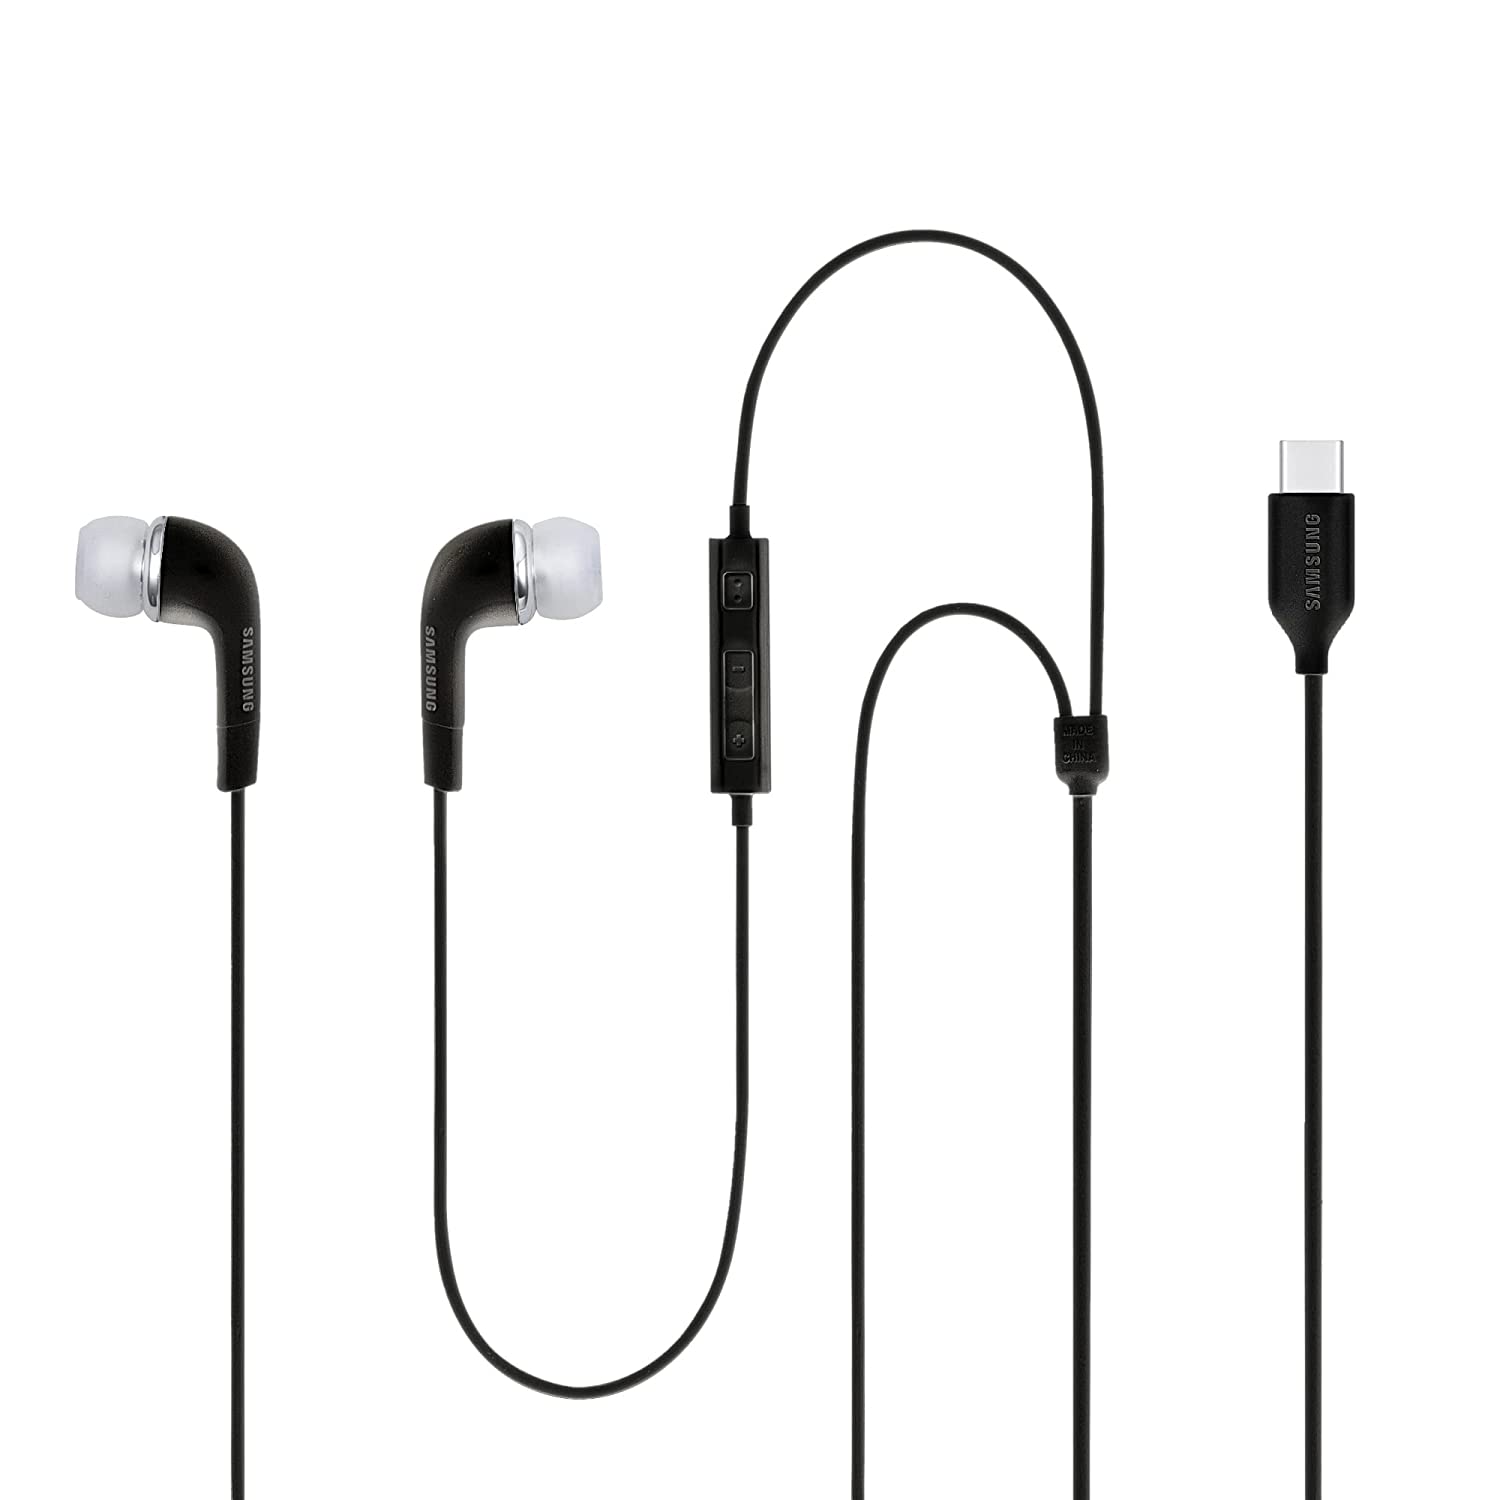 Samsung Original IC050 Type-C Wired in Ear Earphone with mic (Black)